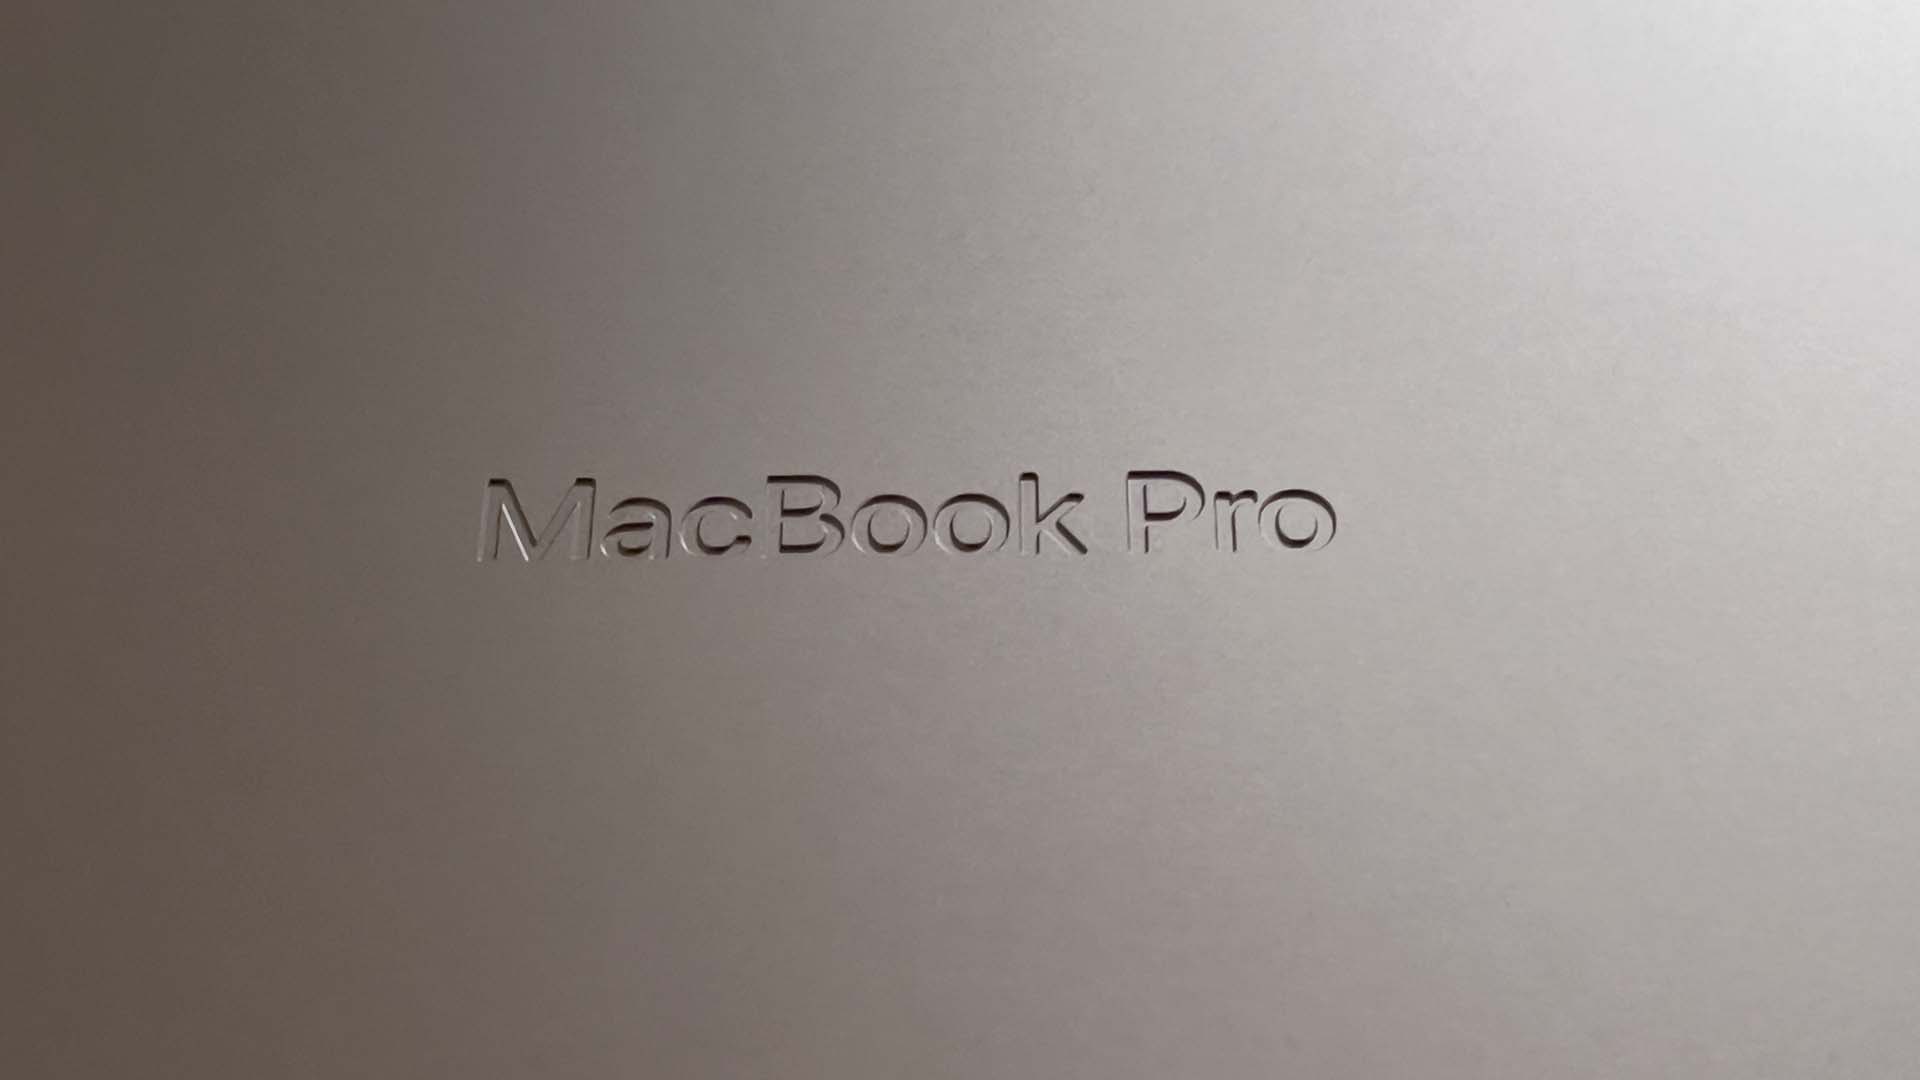 NEW M1 MacBook Air UNBOXING and First Impressions! 